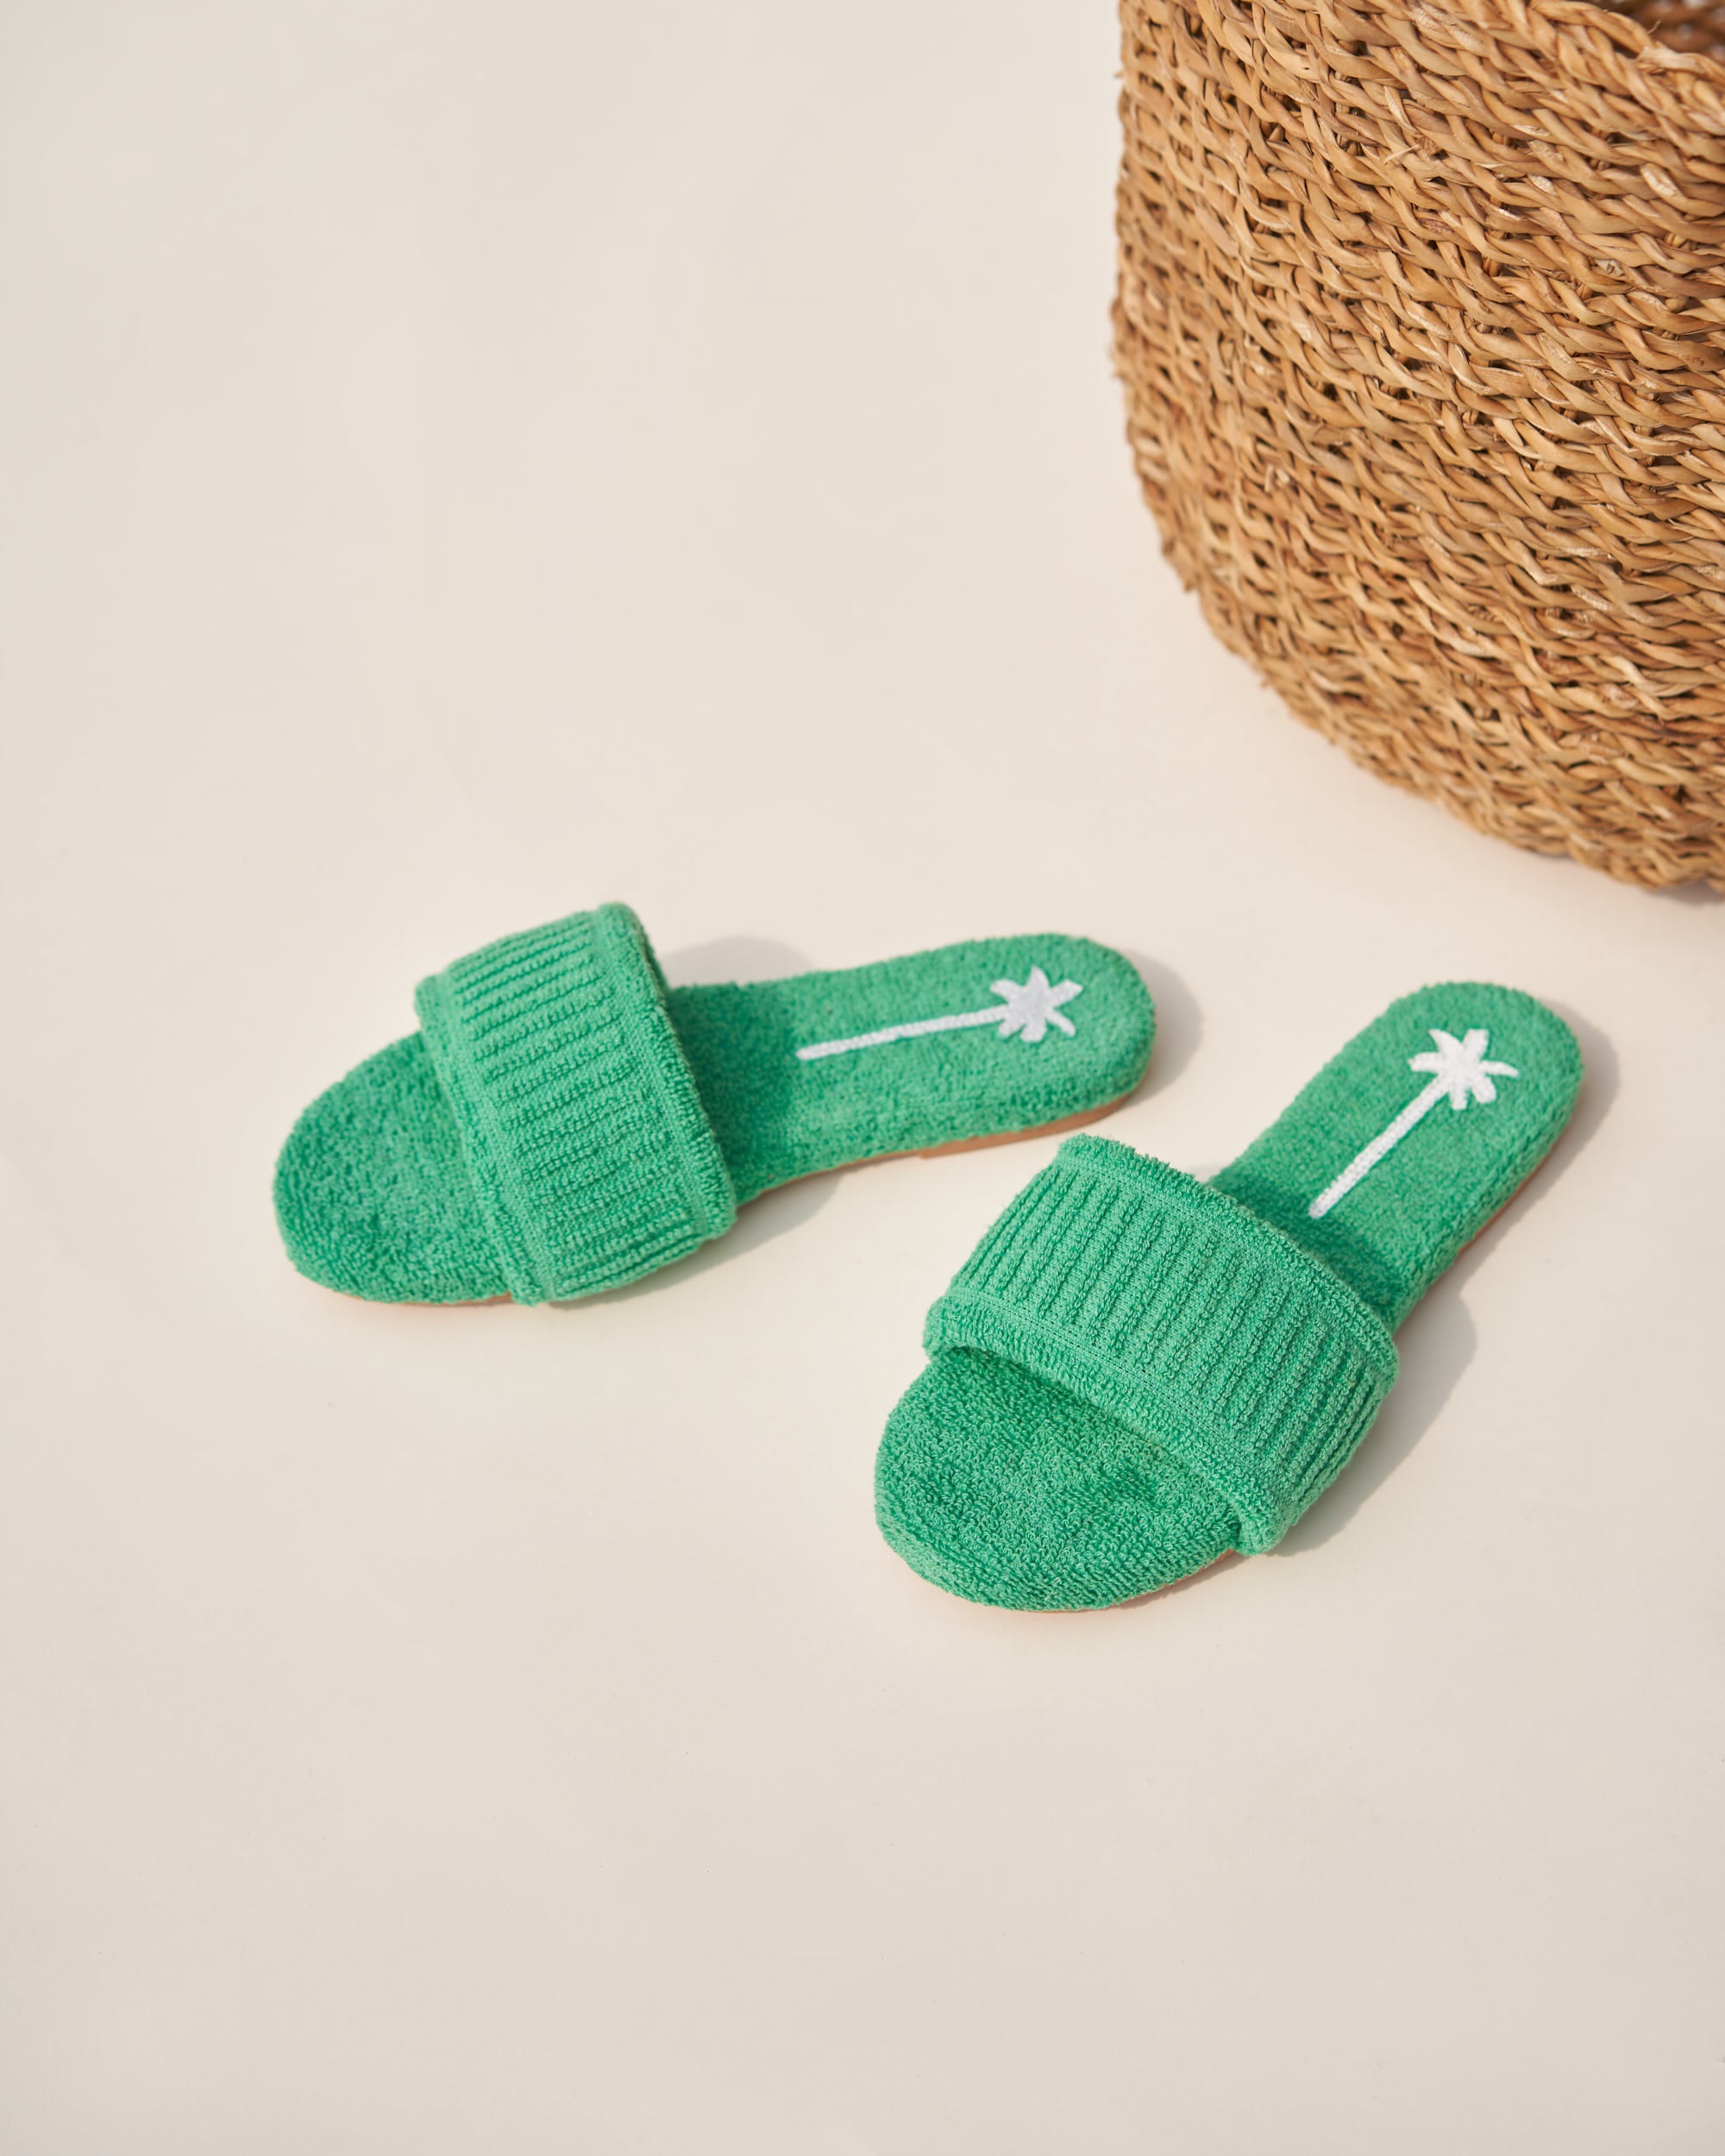 Terry Cotton Slide Sandals - Palm Green & White Palm